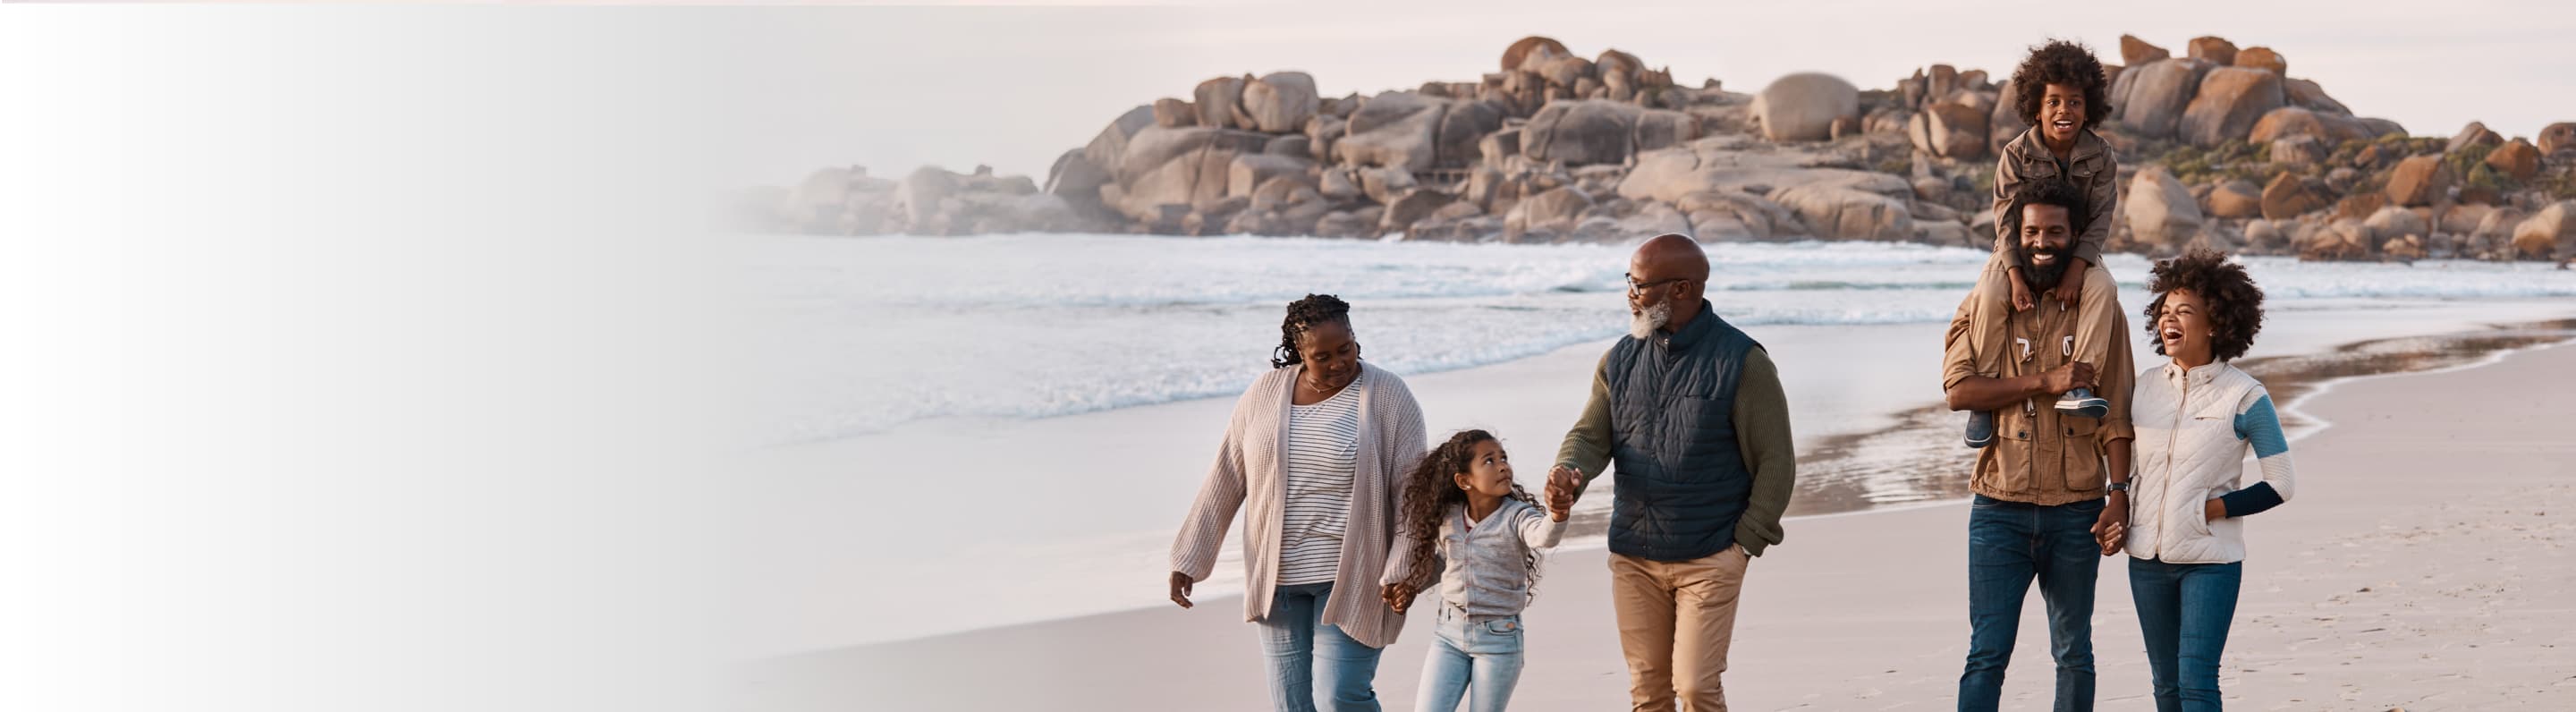 Image showing a family walking on a beach.